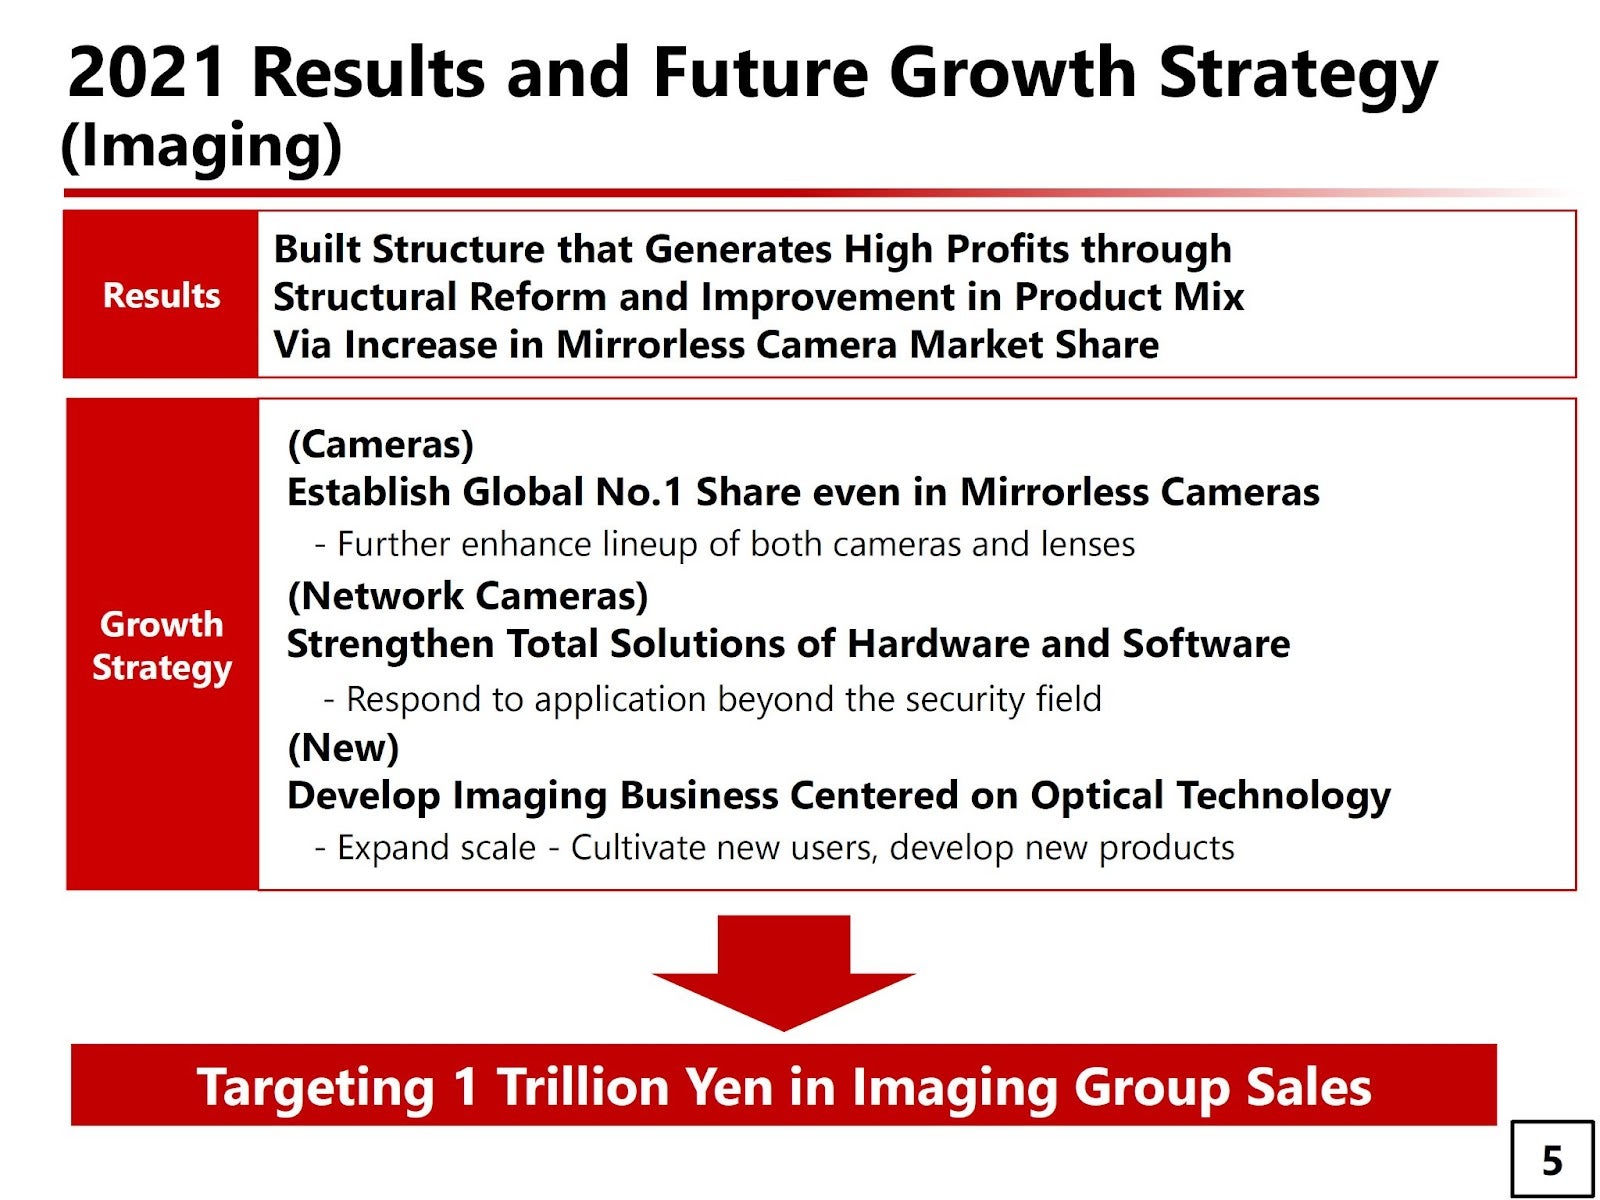 A chart showing Canon's sales and growth figures since 2022.